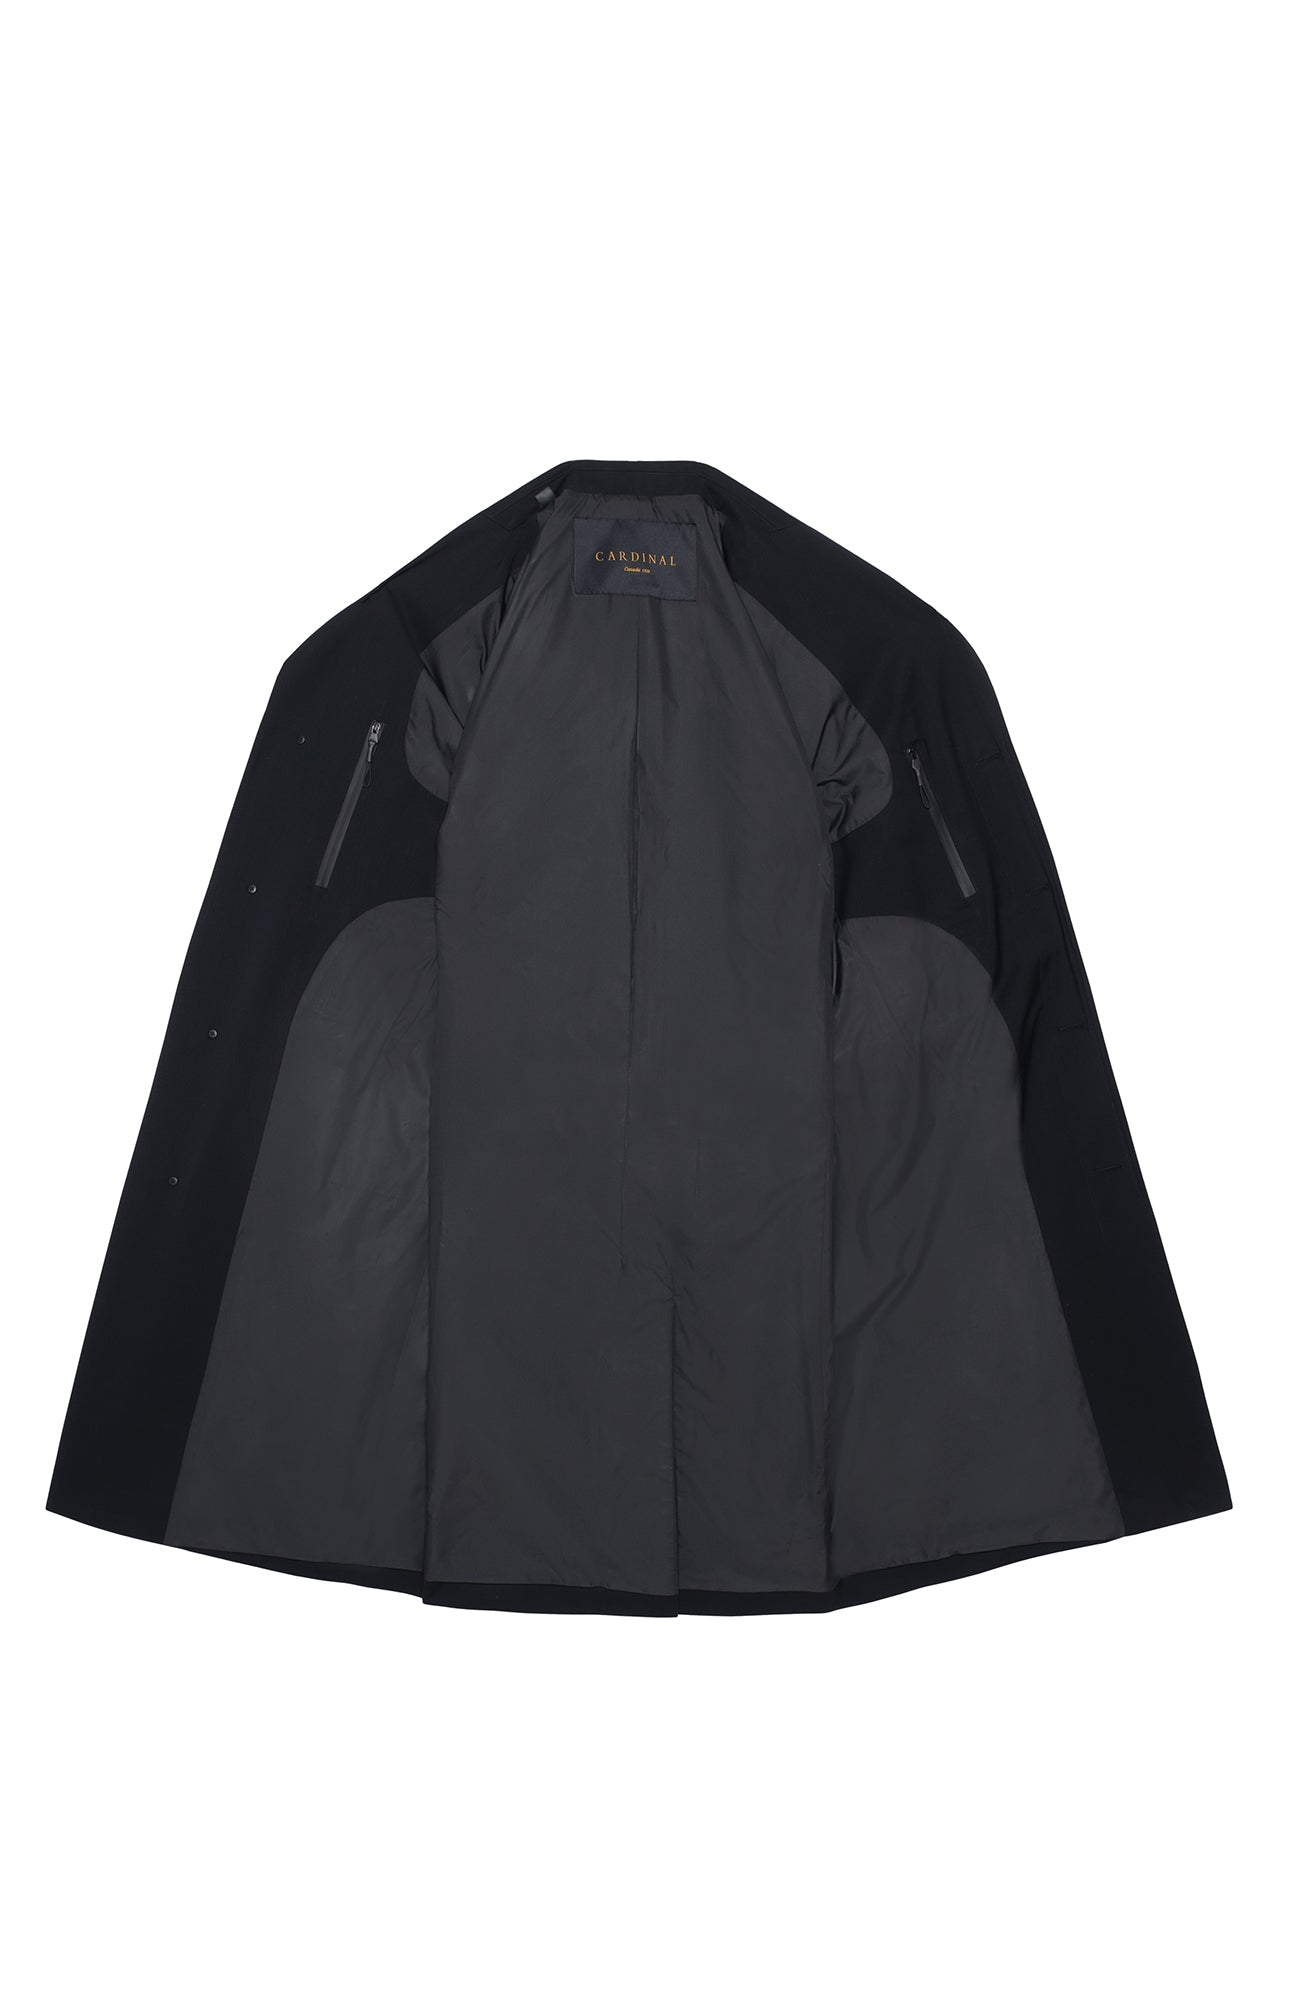 LIMITED EDITION: MAXWELL BLACK BELTED RAINCOAT - MENS - Cardinal of Canada-CA - LIMITED EDITION: MAXWELL BLACK BELTED RAINCOAT 41.5 INCH LENGTH